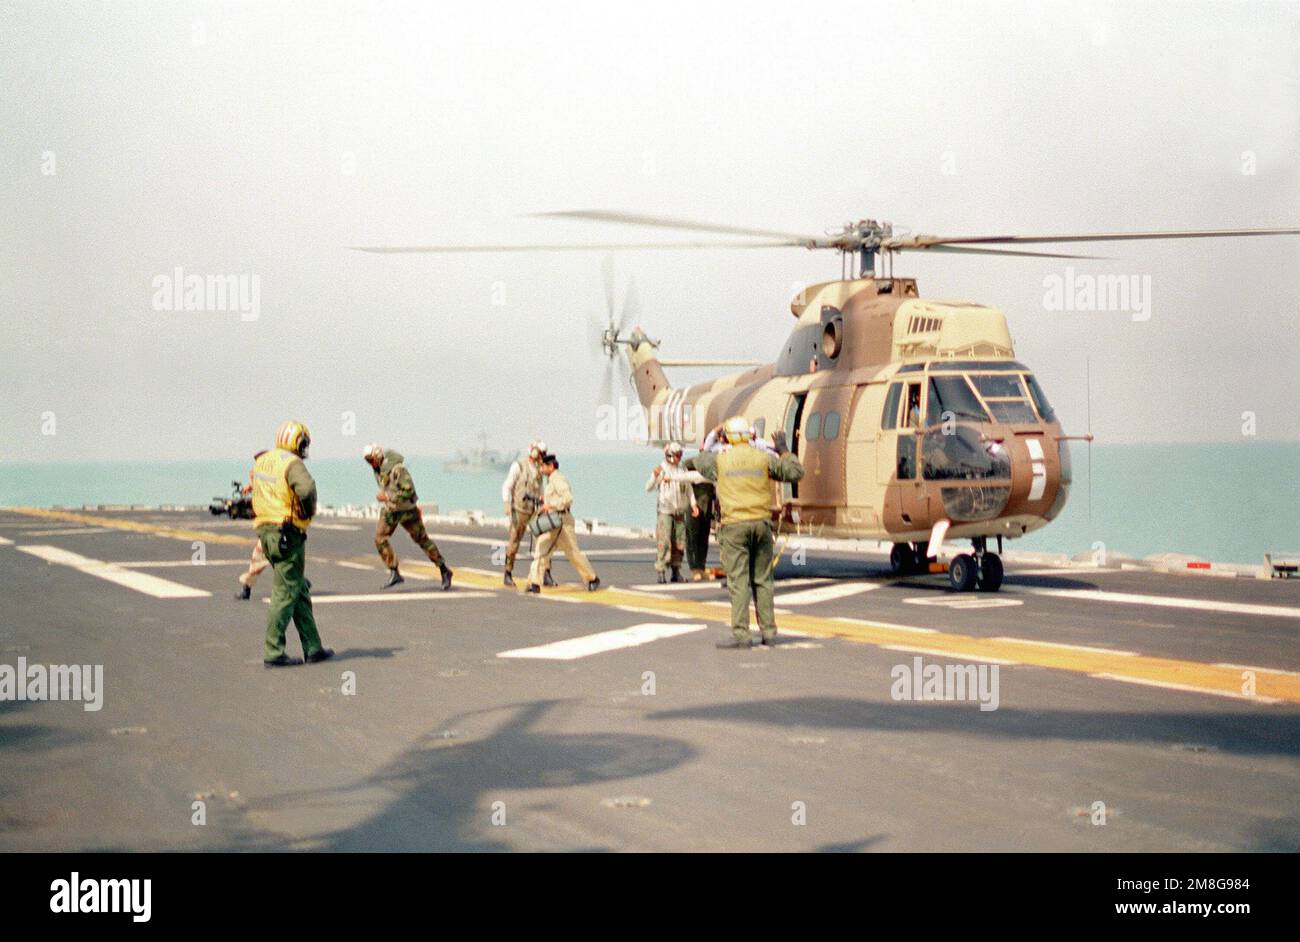 Aviation Boatswain's Mate (Aircraft Handling) 3rd Class John R. Scarry signals to the pilot of a Kuwaiti SA-330 Puma helicopter as it prepares to touch down on the flight deck of the amphibious assault ship USS OKINAWA (LPH-3). Country: Unknown Stock Photo